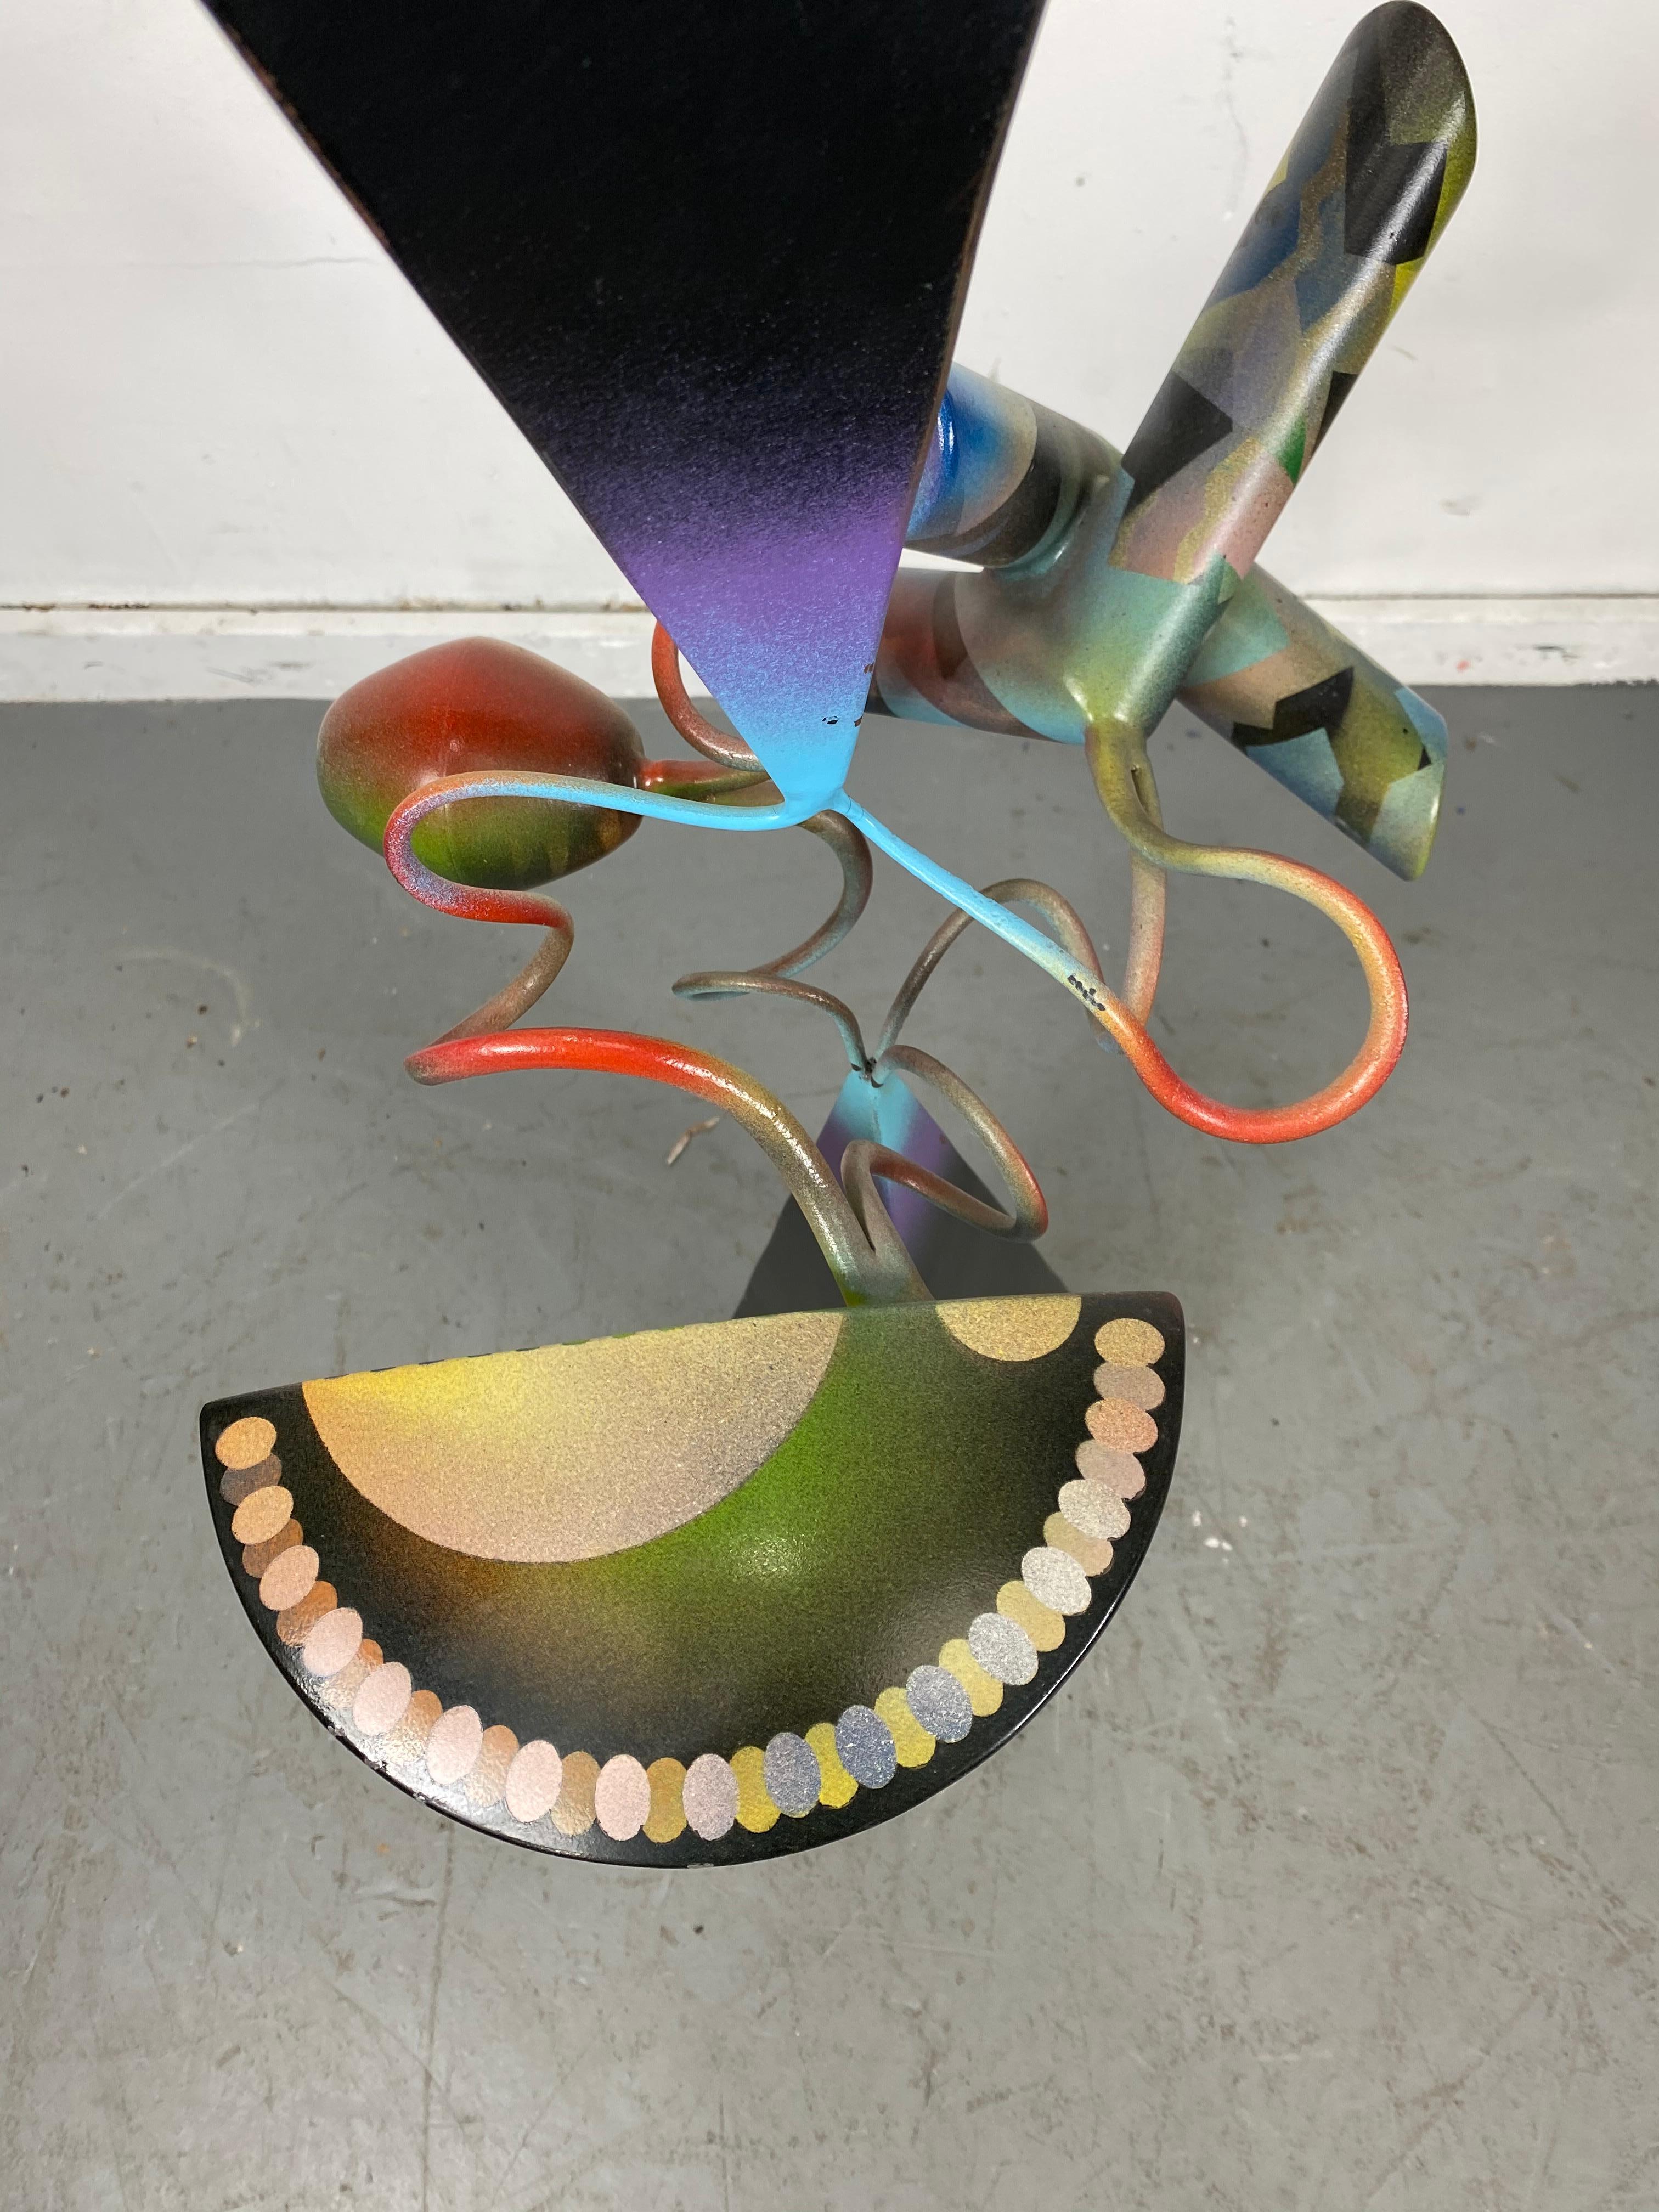 Memphis style abstract free-standing Welded steel sculpture by Jerry Dodd, his sculptural pieces are painted with enamels and are suitable for display indoors or protected areas outdoors,
About the artist:

Jerry Dodd lives and works in Commerce,